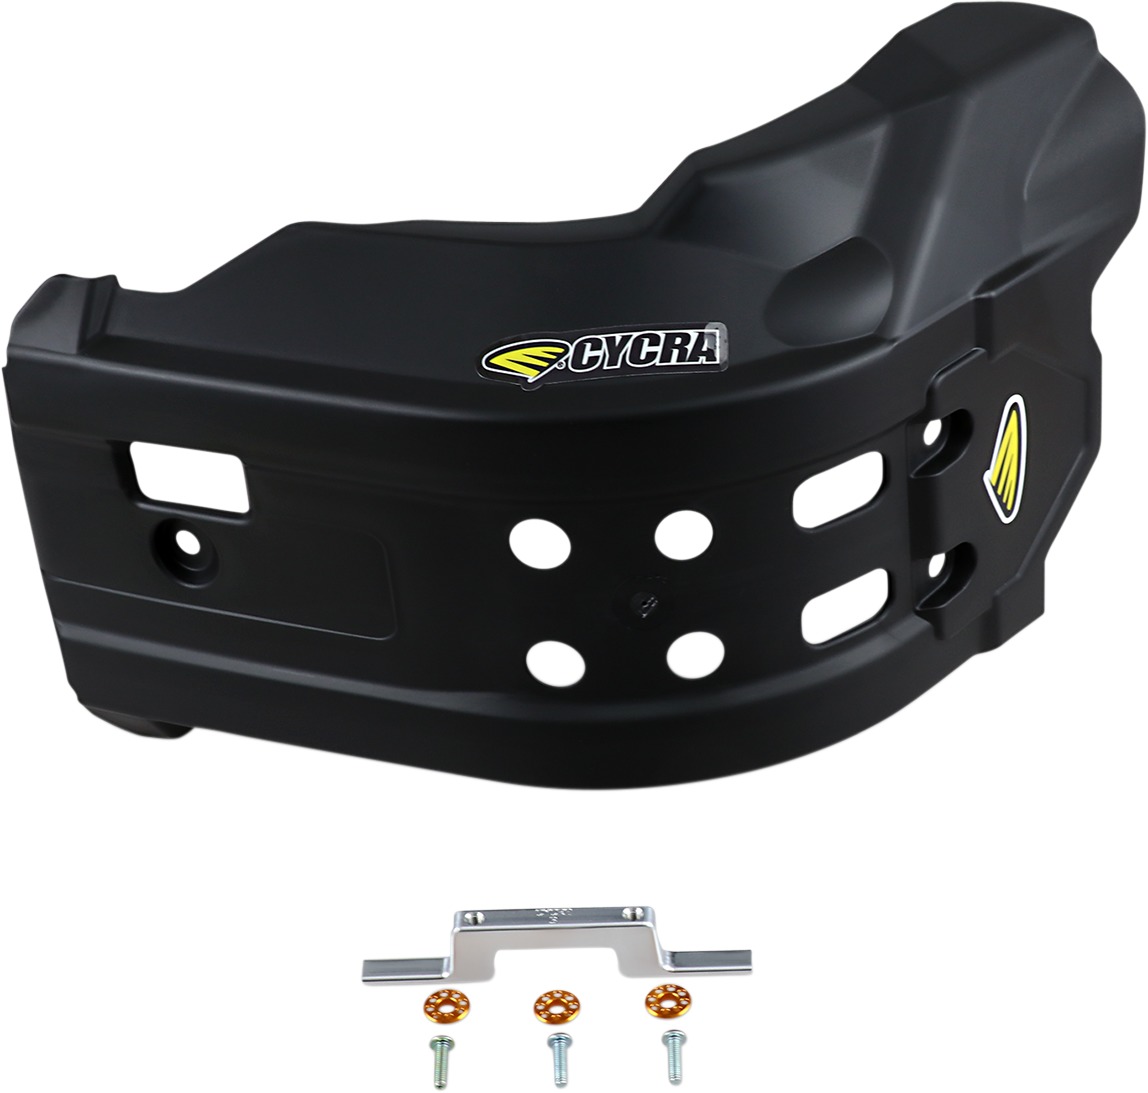 Armor Skid Plate - Black - For 18-22 Yamaha YZ450F 19-22 YZ250F - Click Image to Close